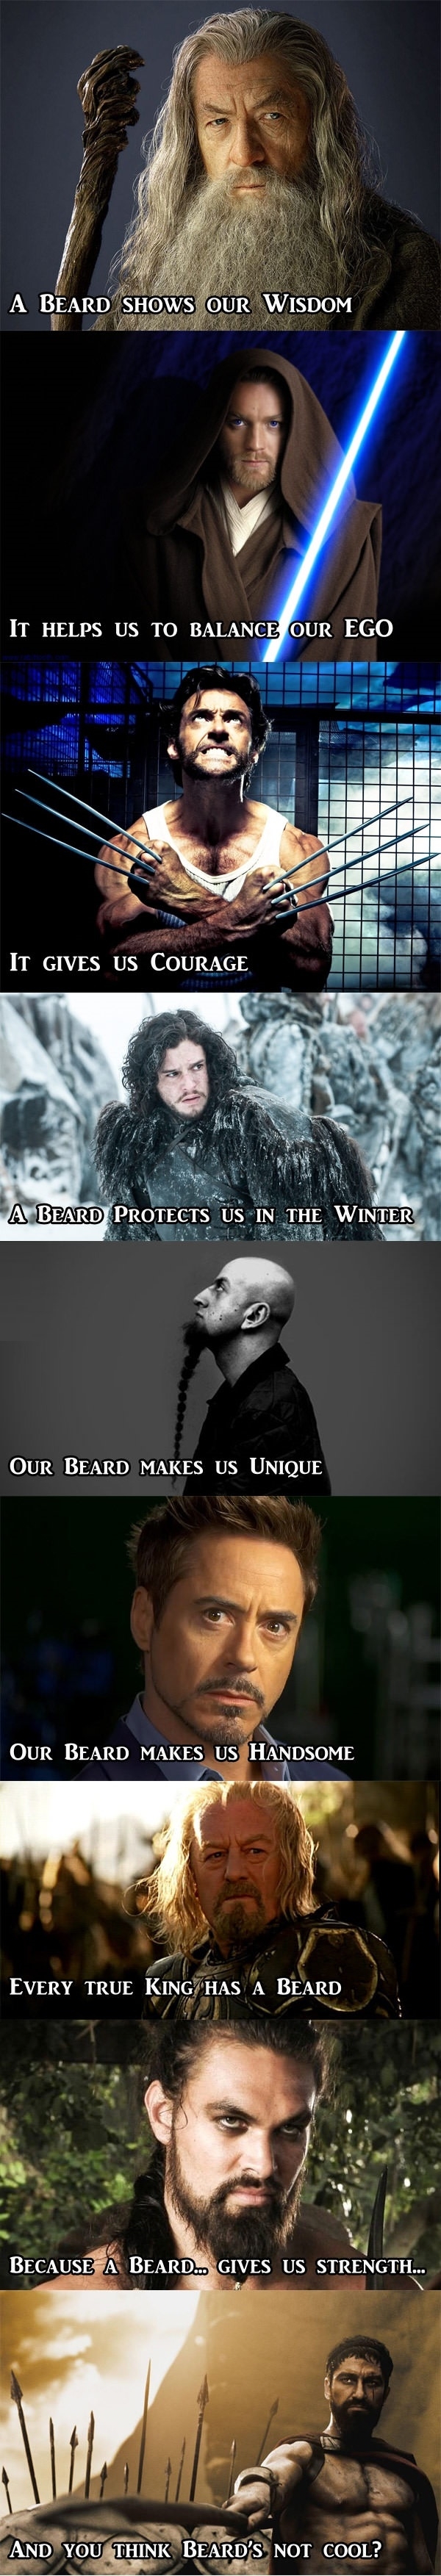 Reasons beards are cool